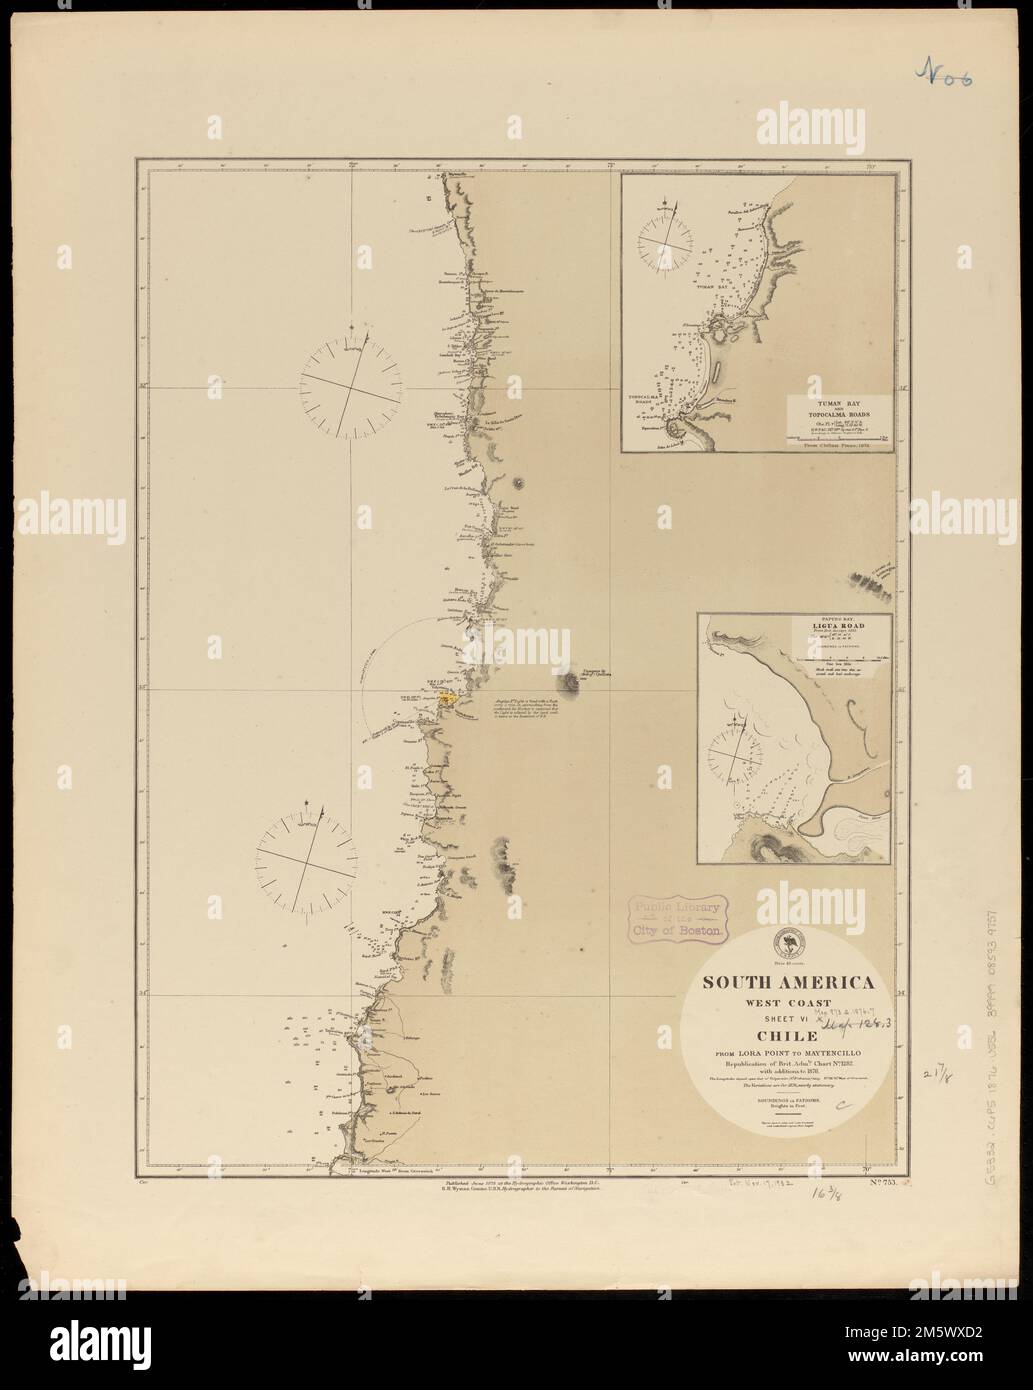 South America, west coast : republication of Brit. Admty. chart no. 1282, with additions to 1876. Relief shown by hachures and spot heights. Depths shown by soundings. Insets: Tuman Bay and Topocalma Roads -- Papudo Bay, Ligua Road... Chile, from Lora Point to Maytencillo. Chile, from Lora Point to Maytencillo, Chile  , Libertador General Bernardo O'Higgins  ,region   , Topocalma, Caleta  ,cove  Chile  , Valparaíso  ,region   , La Ligua, Caleta de  ,bay Stock Photo